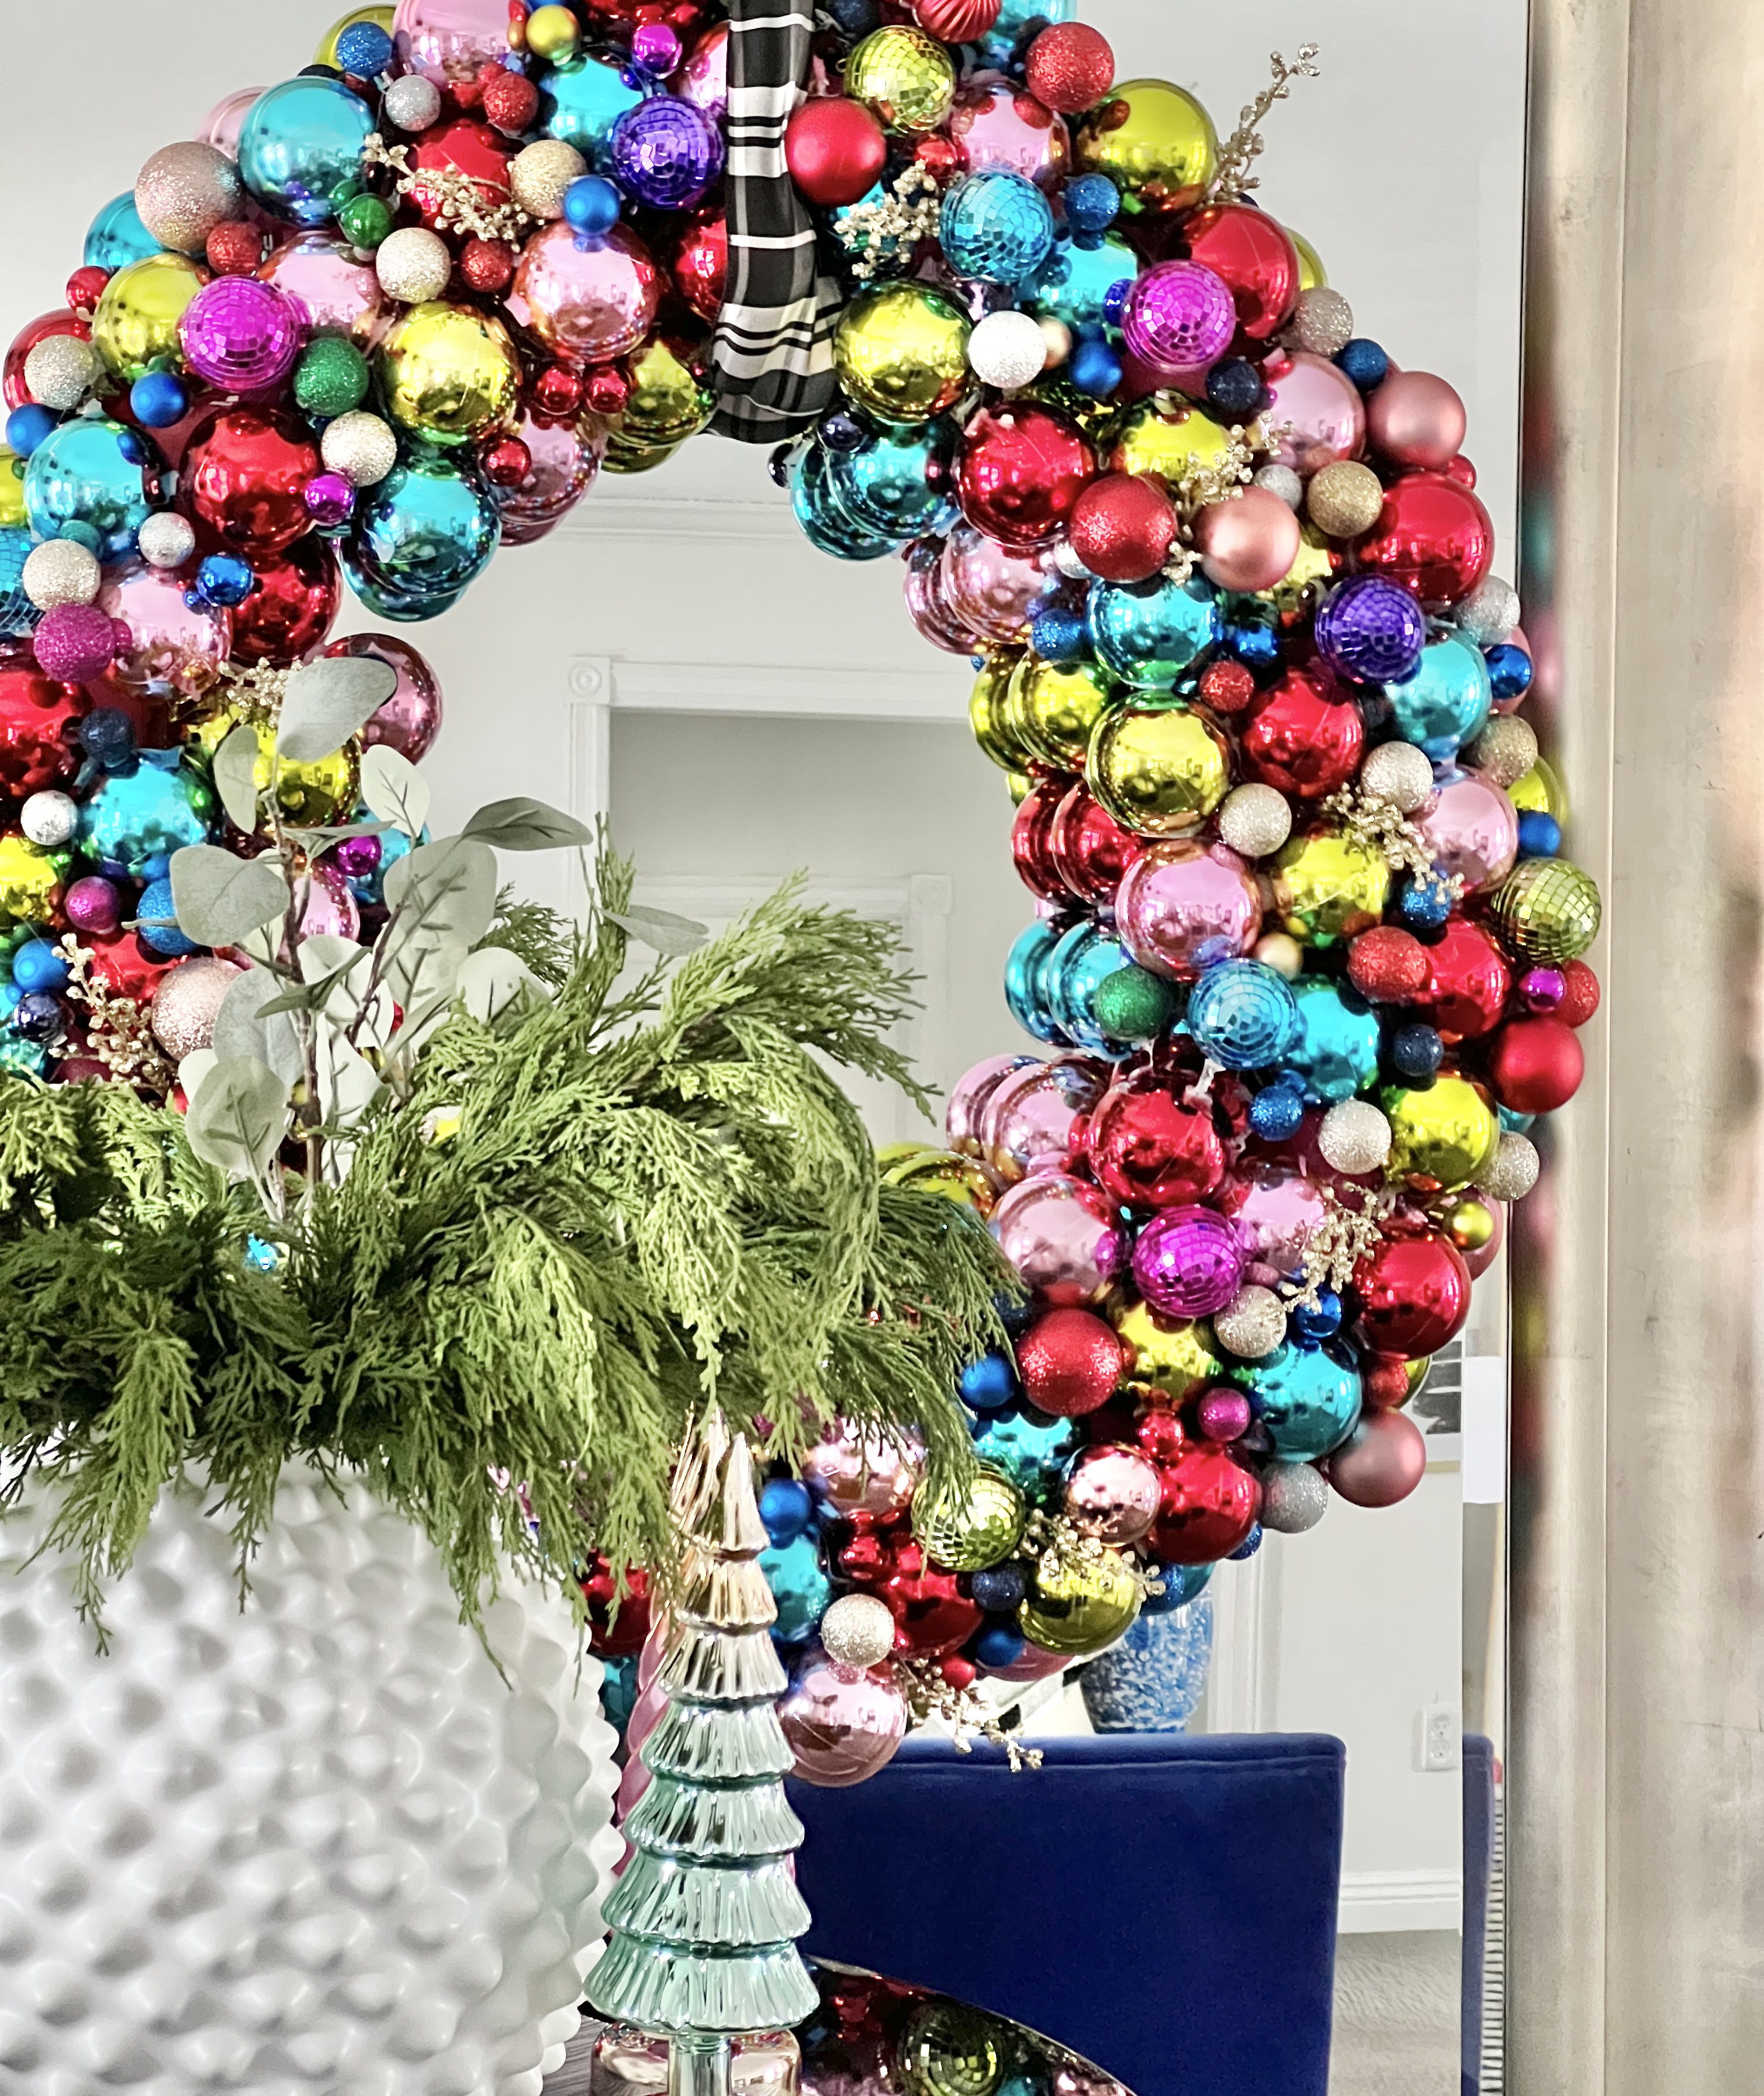 How to Make a Pool Noodle Christmas Ornament Wreath